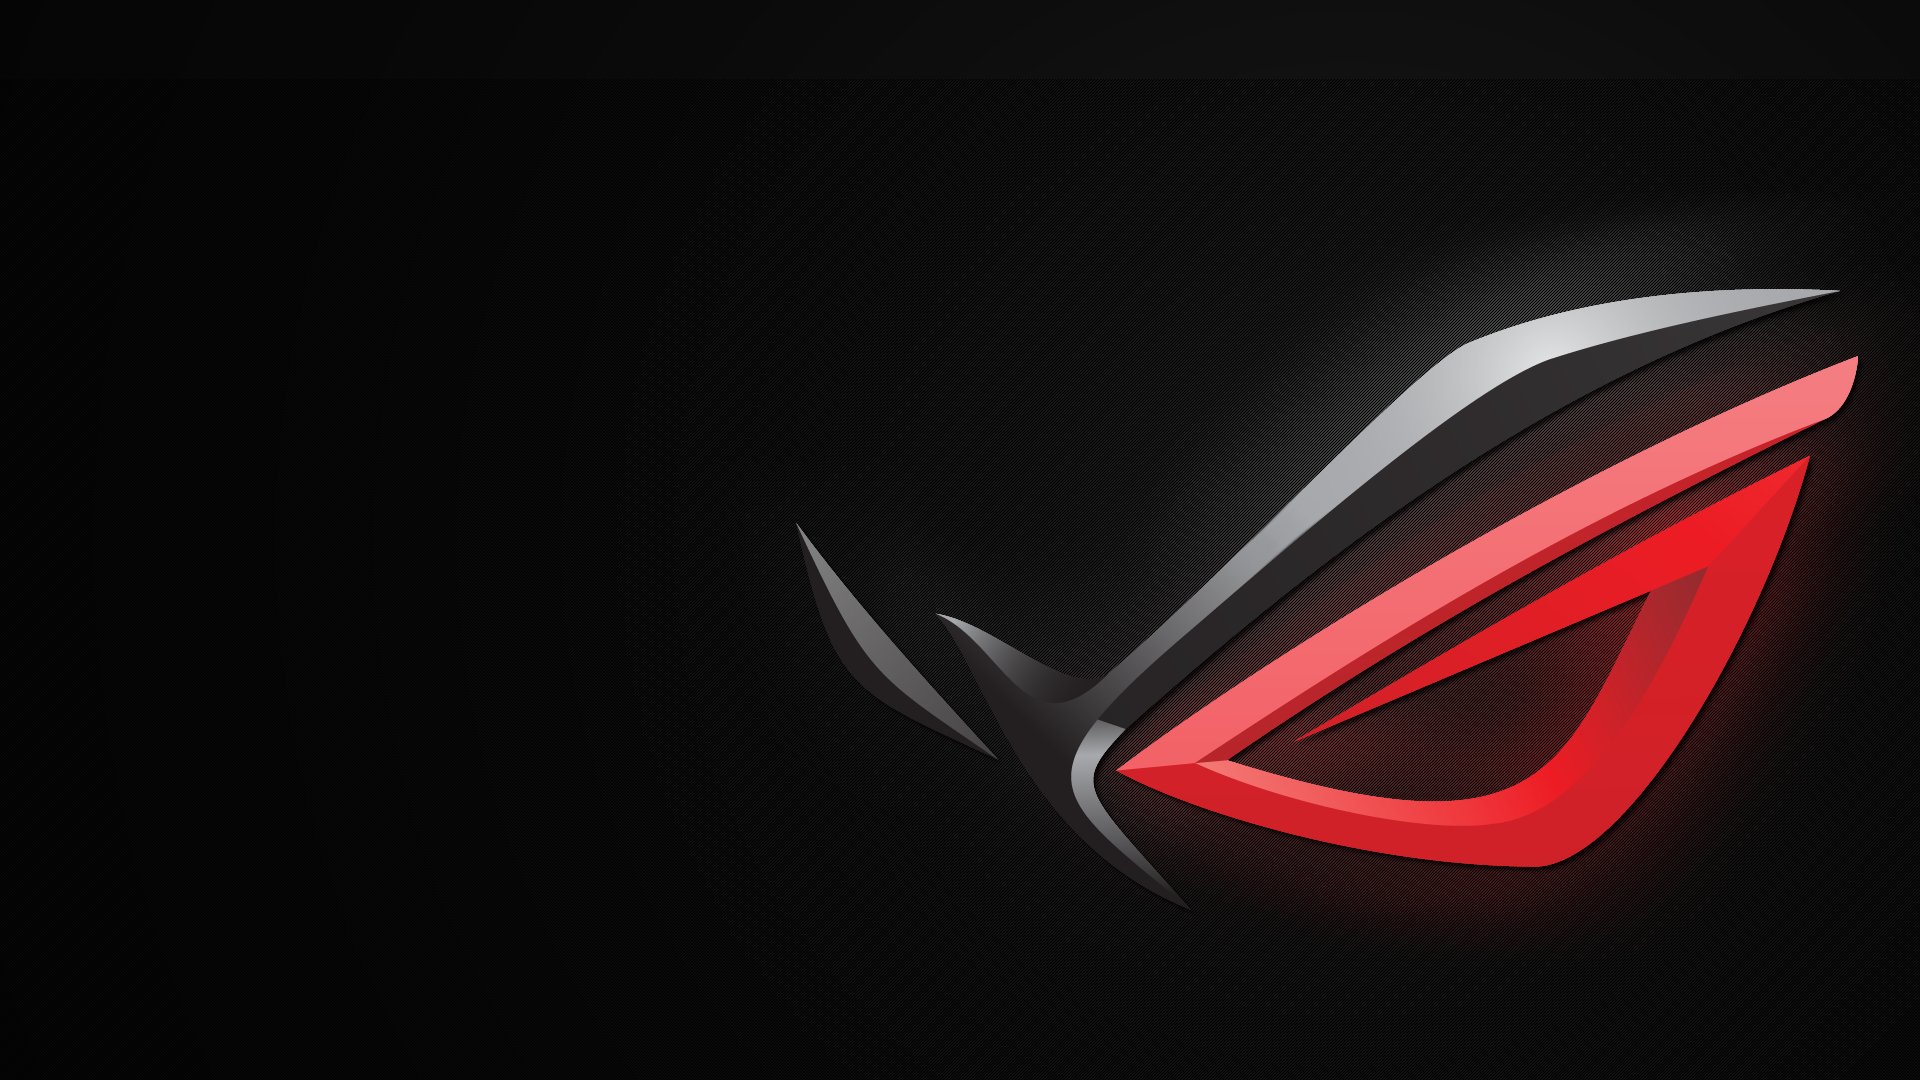 Asus background